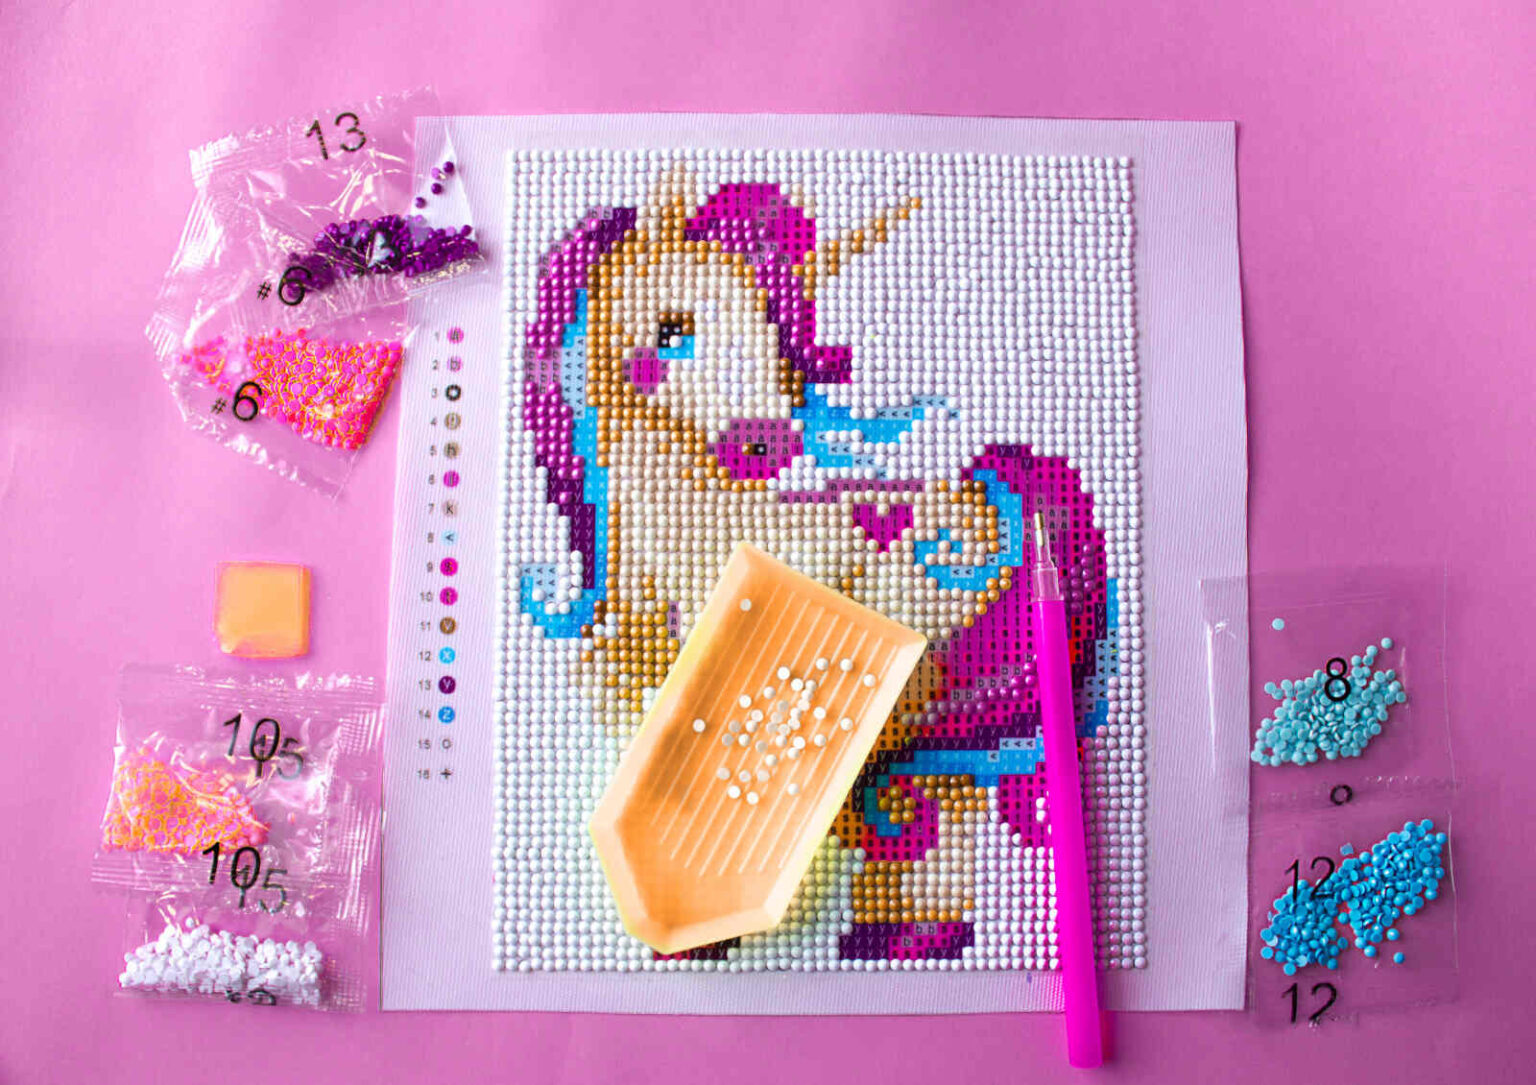 Diamond painting is the new crafting trend taking the world by storm. Involve your whole family in this fun activity with these kid-approved kits.